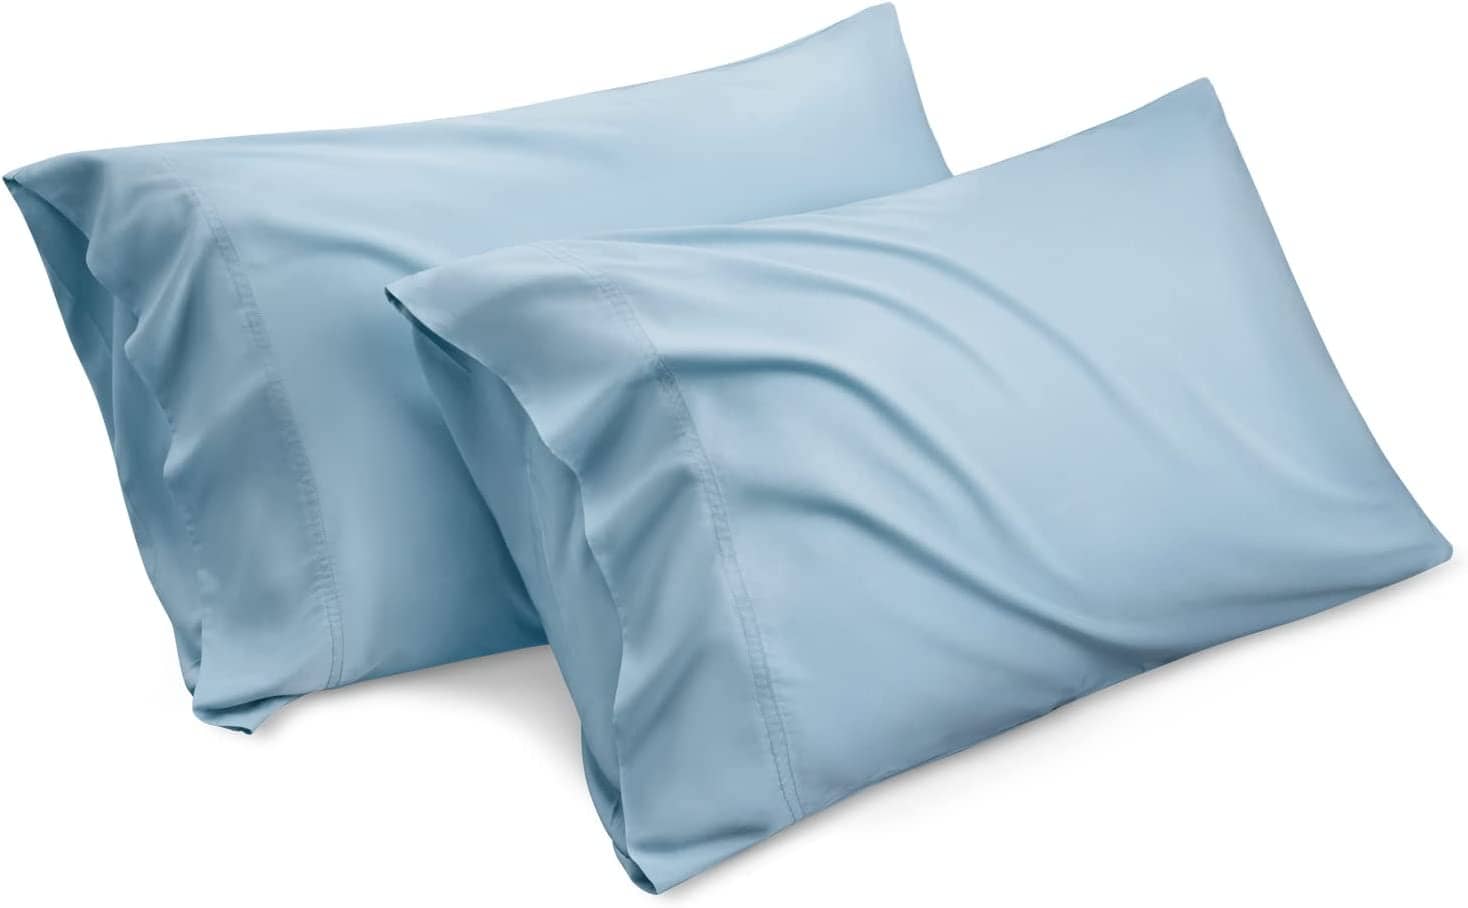 Bedsure Cooling Pillow Case Queen Size 2 Pack - Rayon Made from Bamboo,  White Chill Pillowcase, Soft & Breathable Pillow Covers with Envelope  Closure